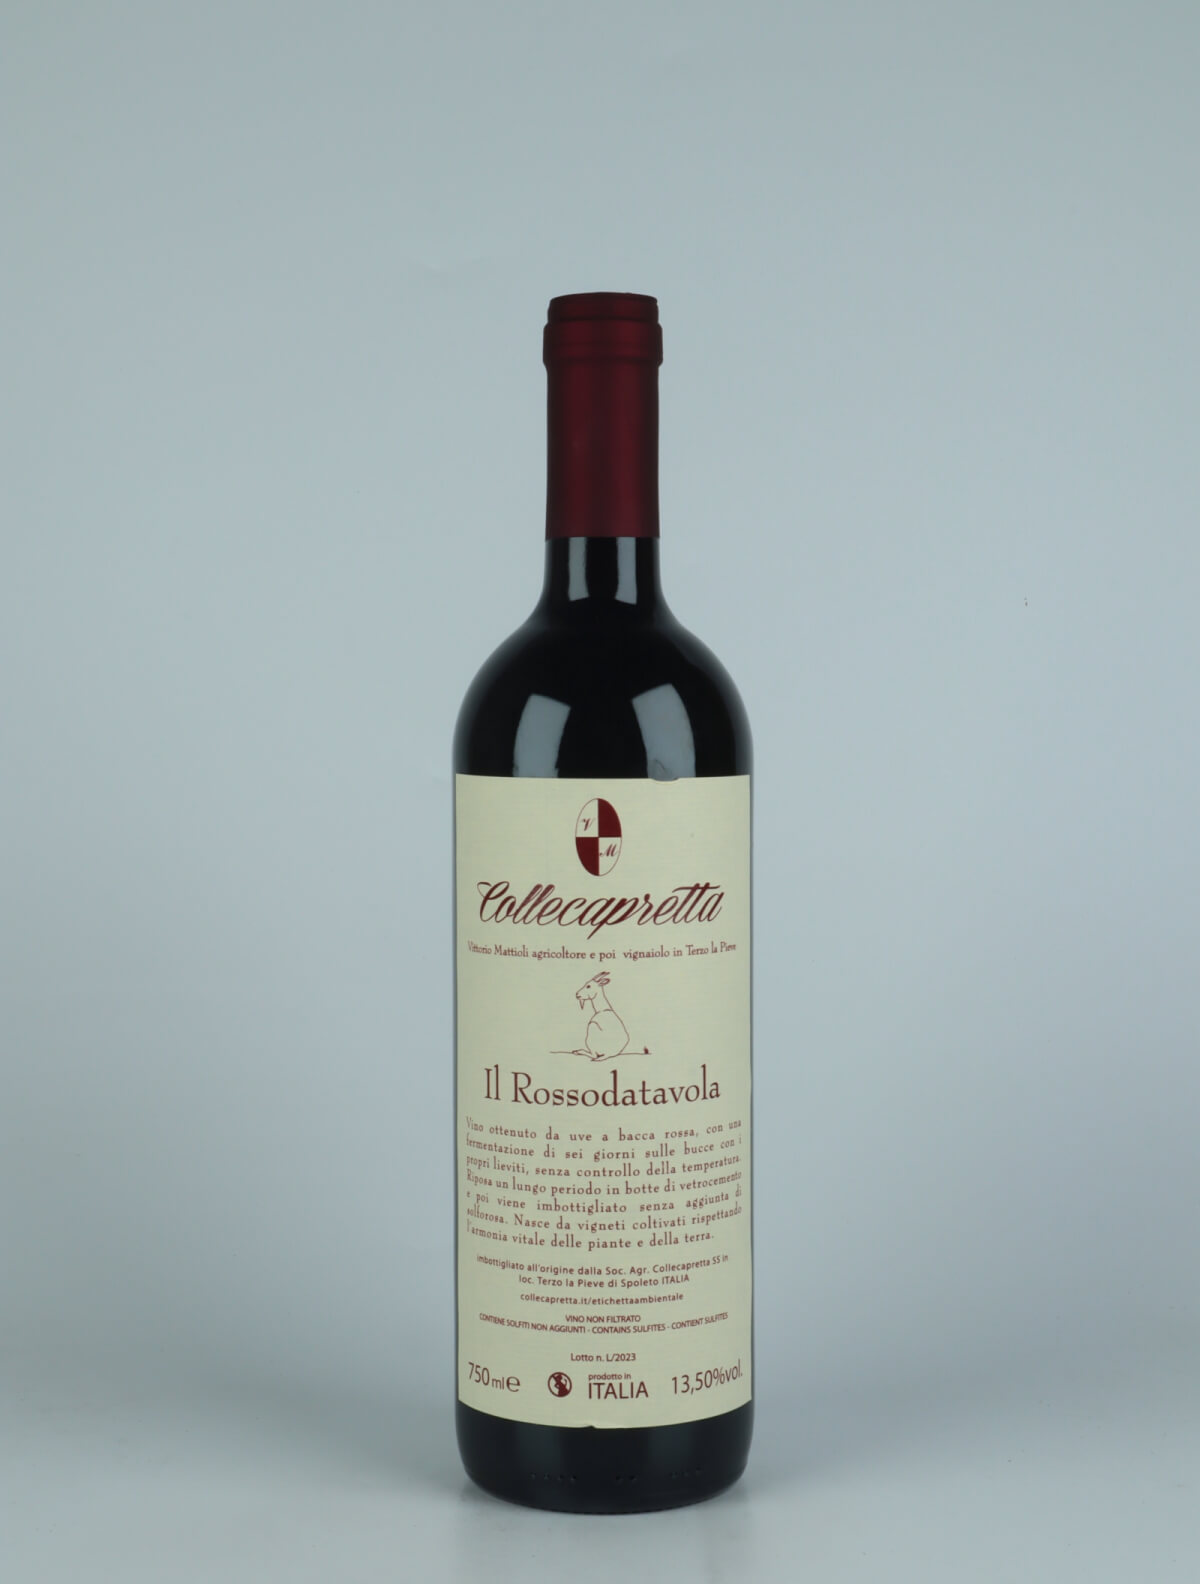 A bottle N.V. Rossodatavola Red wine from Collecapretta, Umbria in Italy